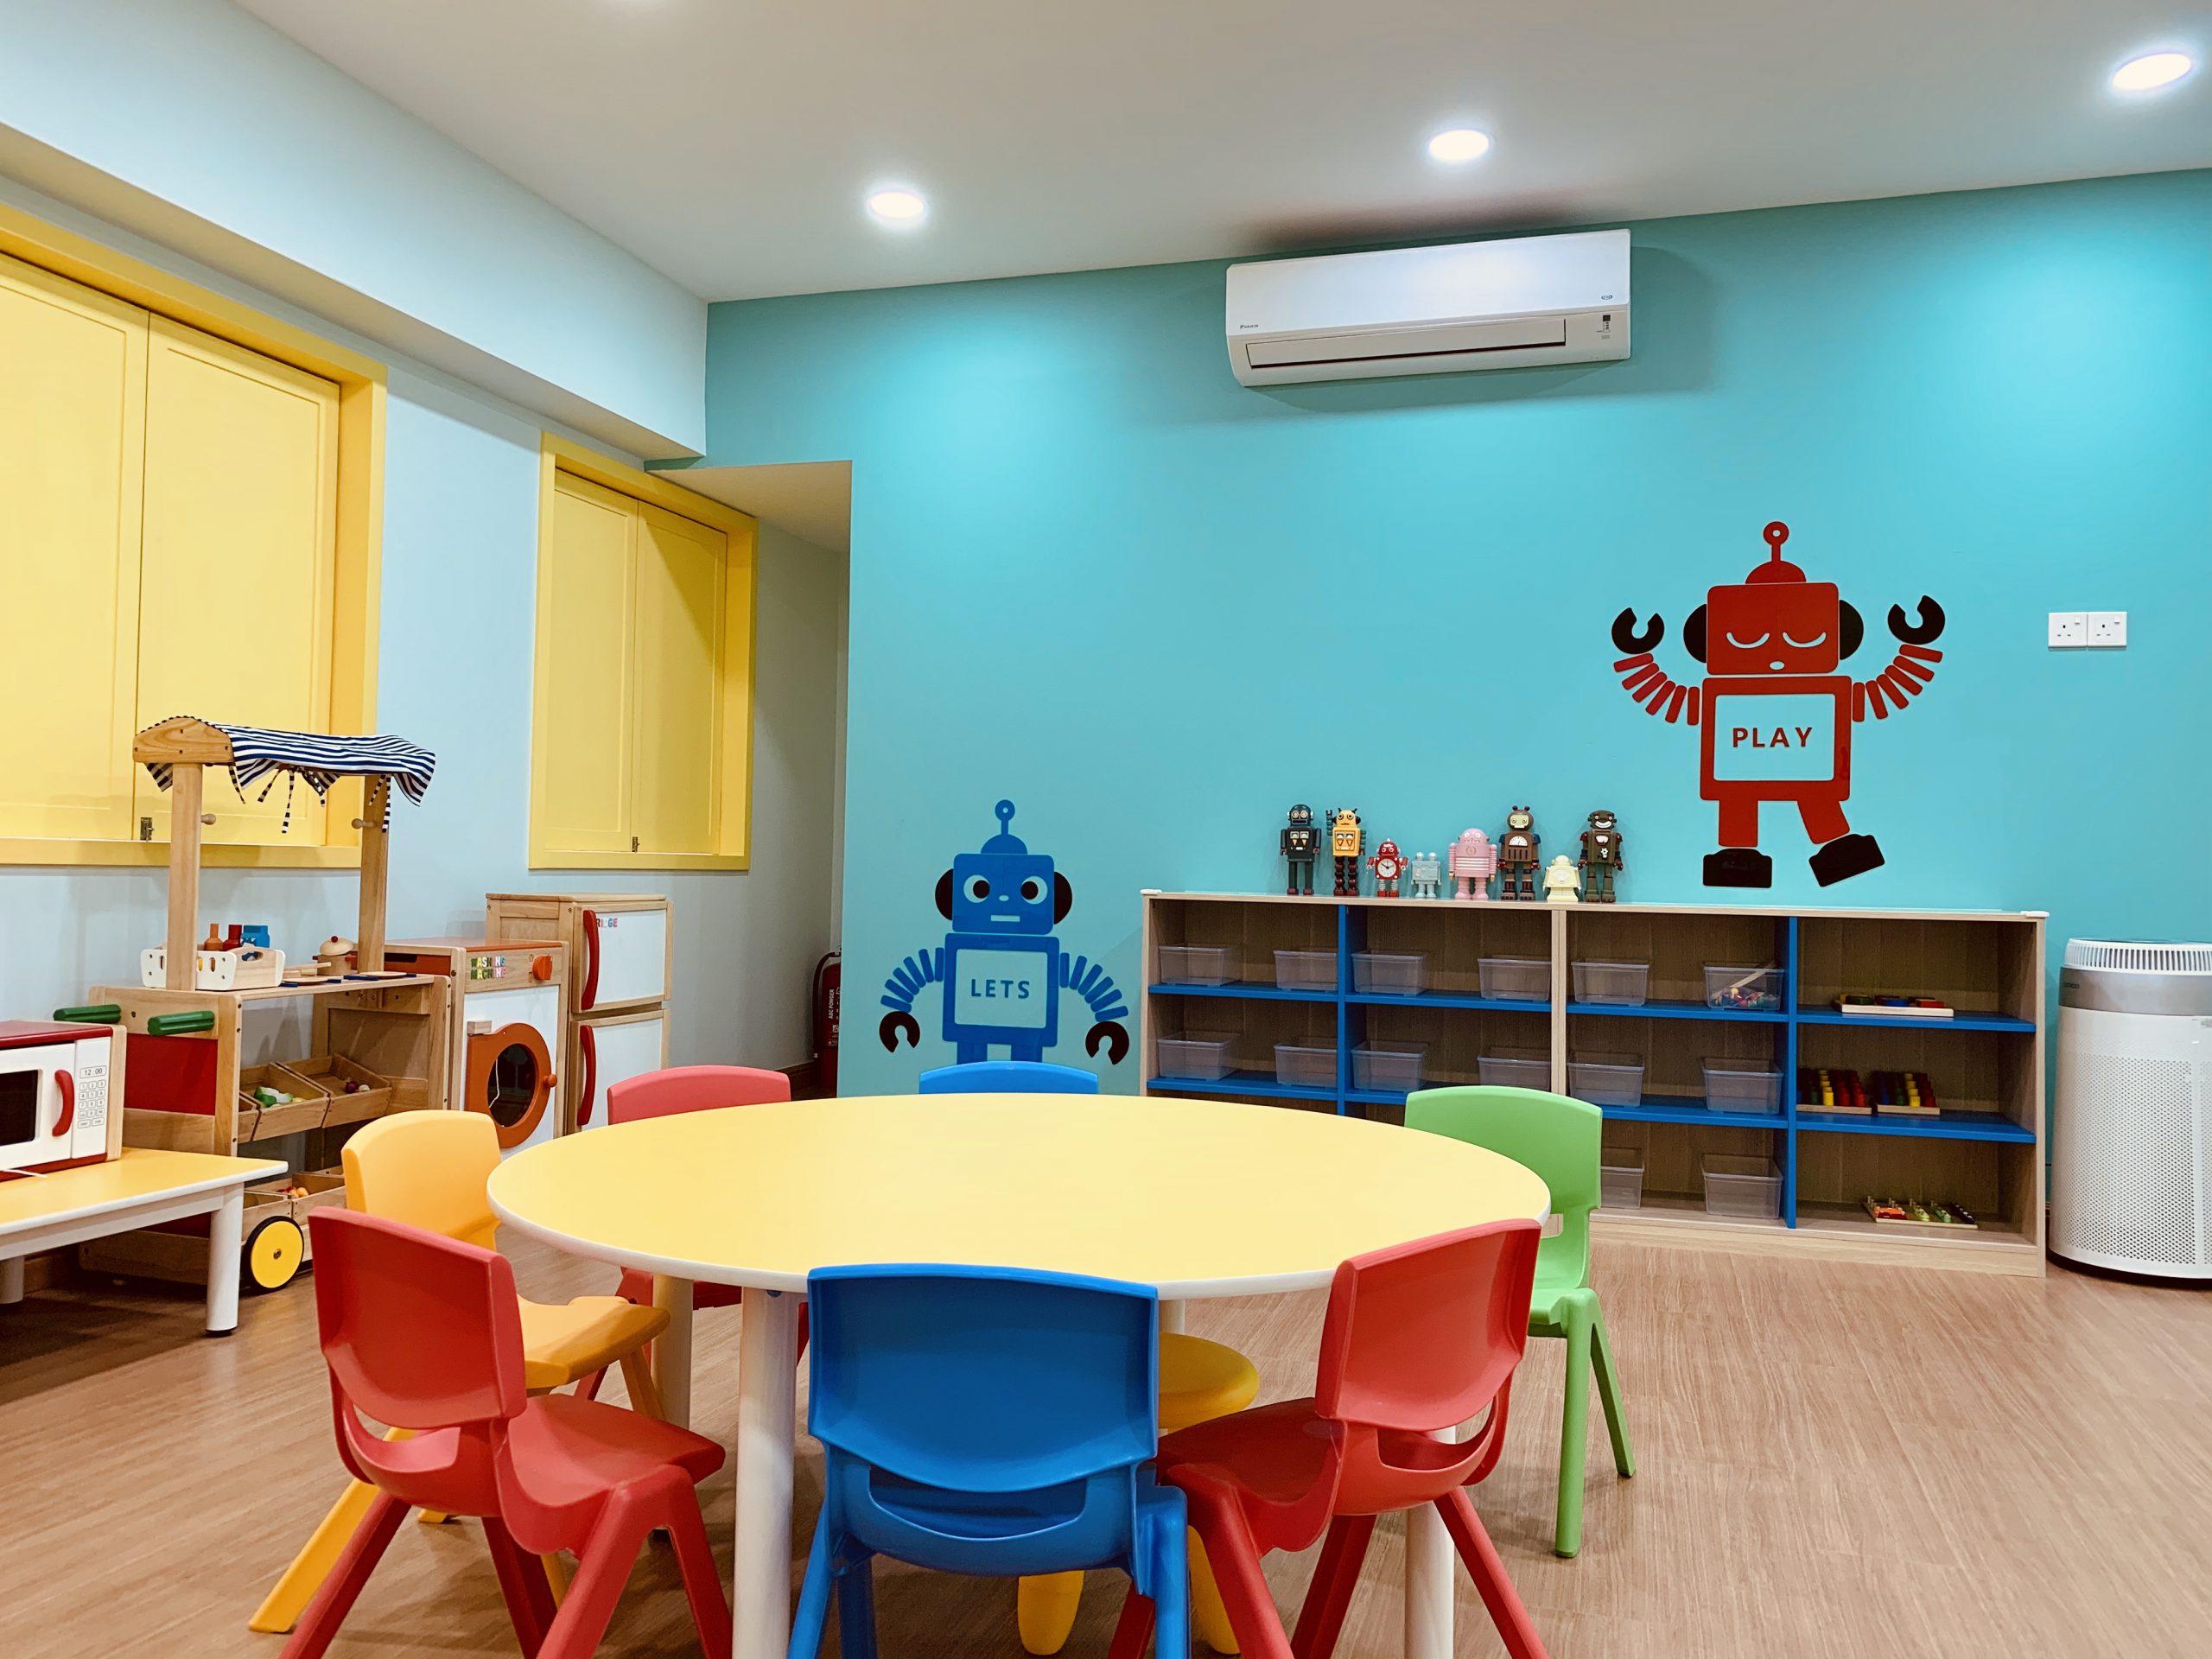 What makes a good daycare space design?